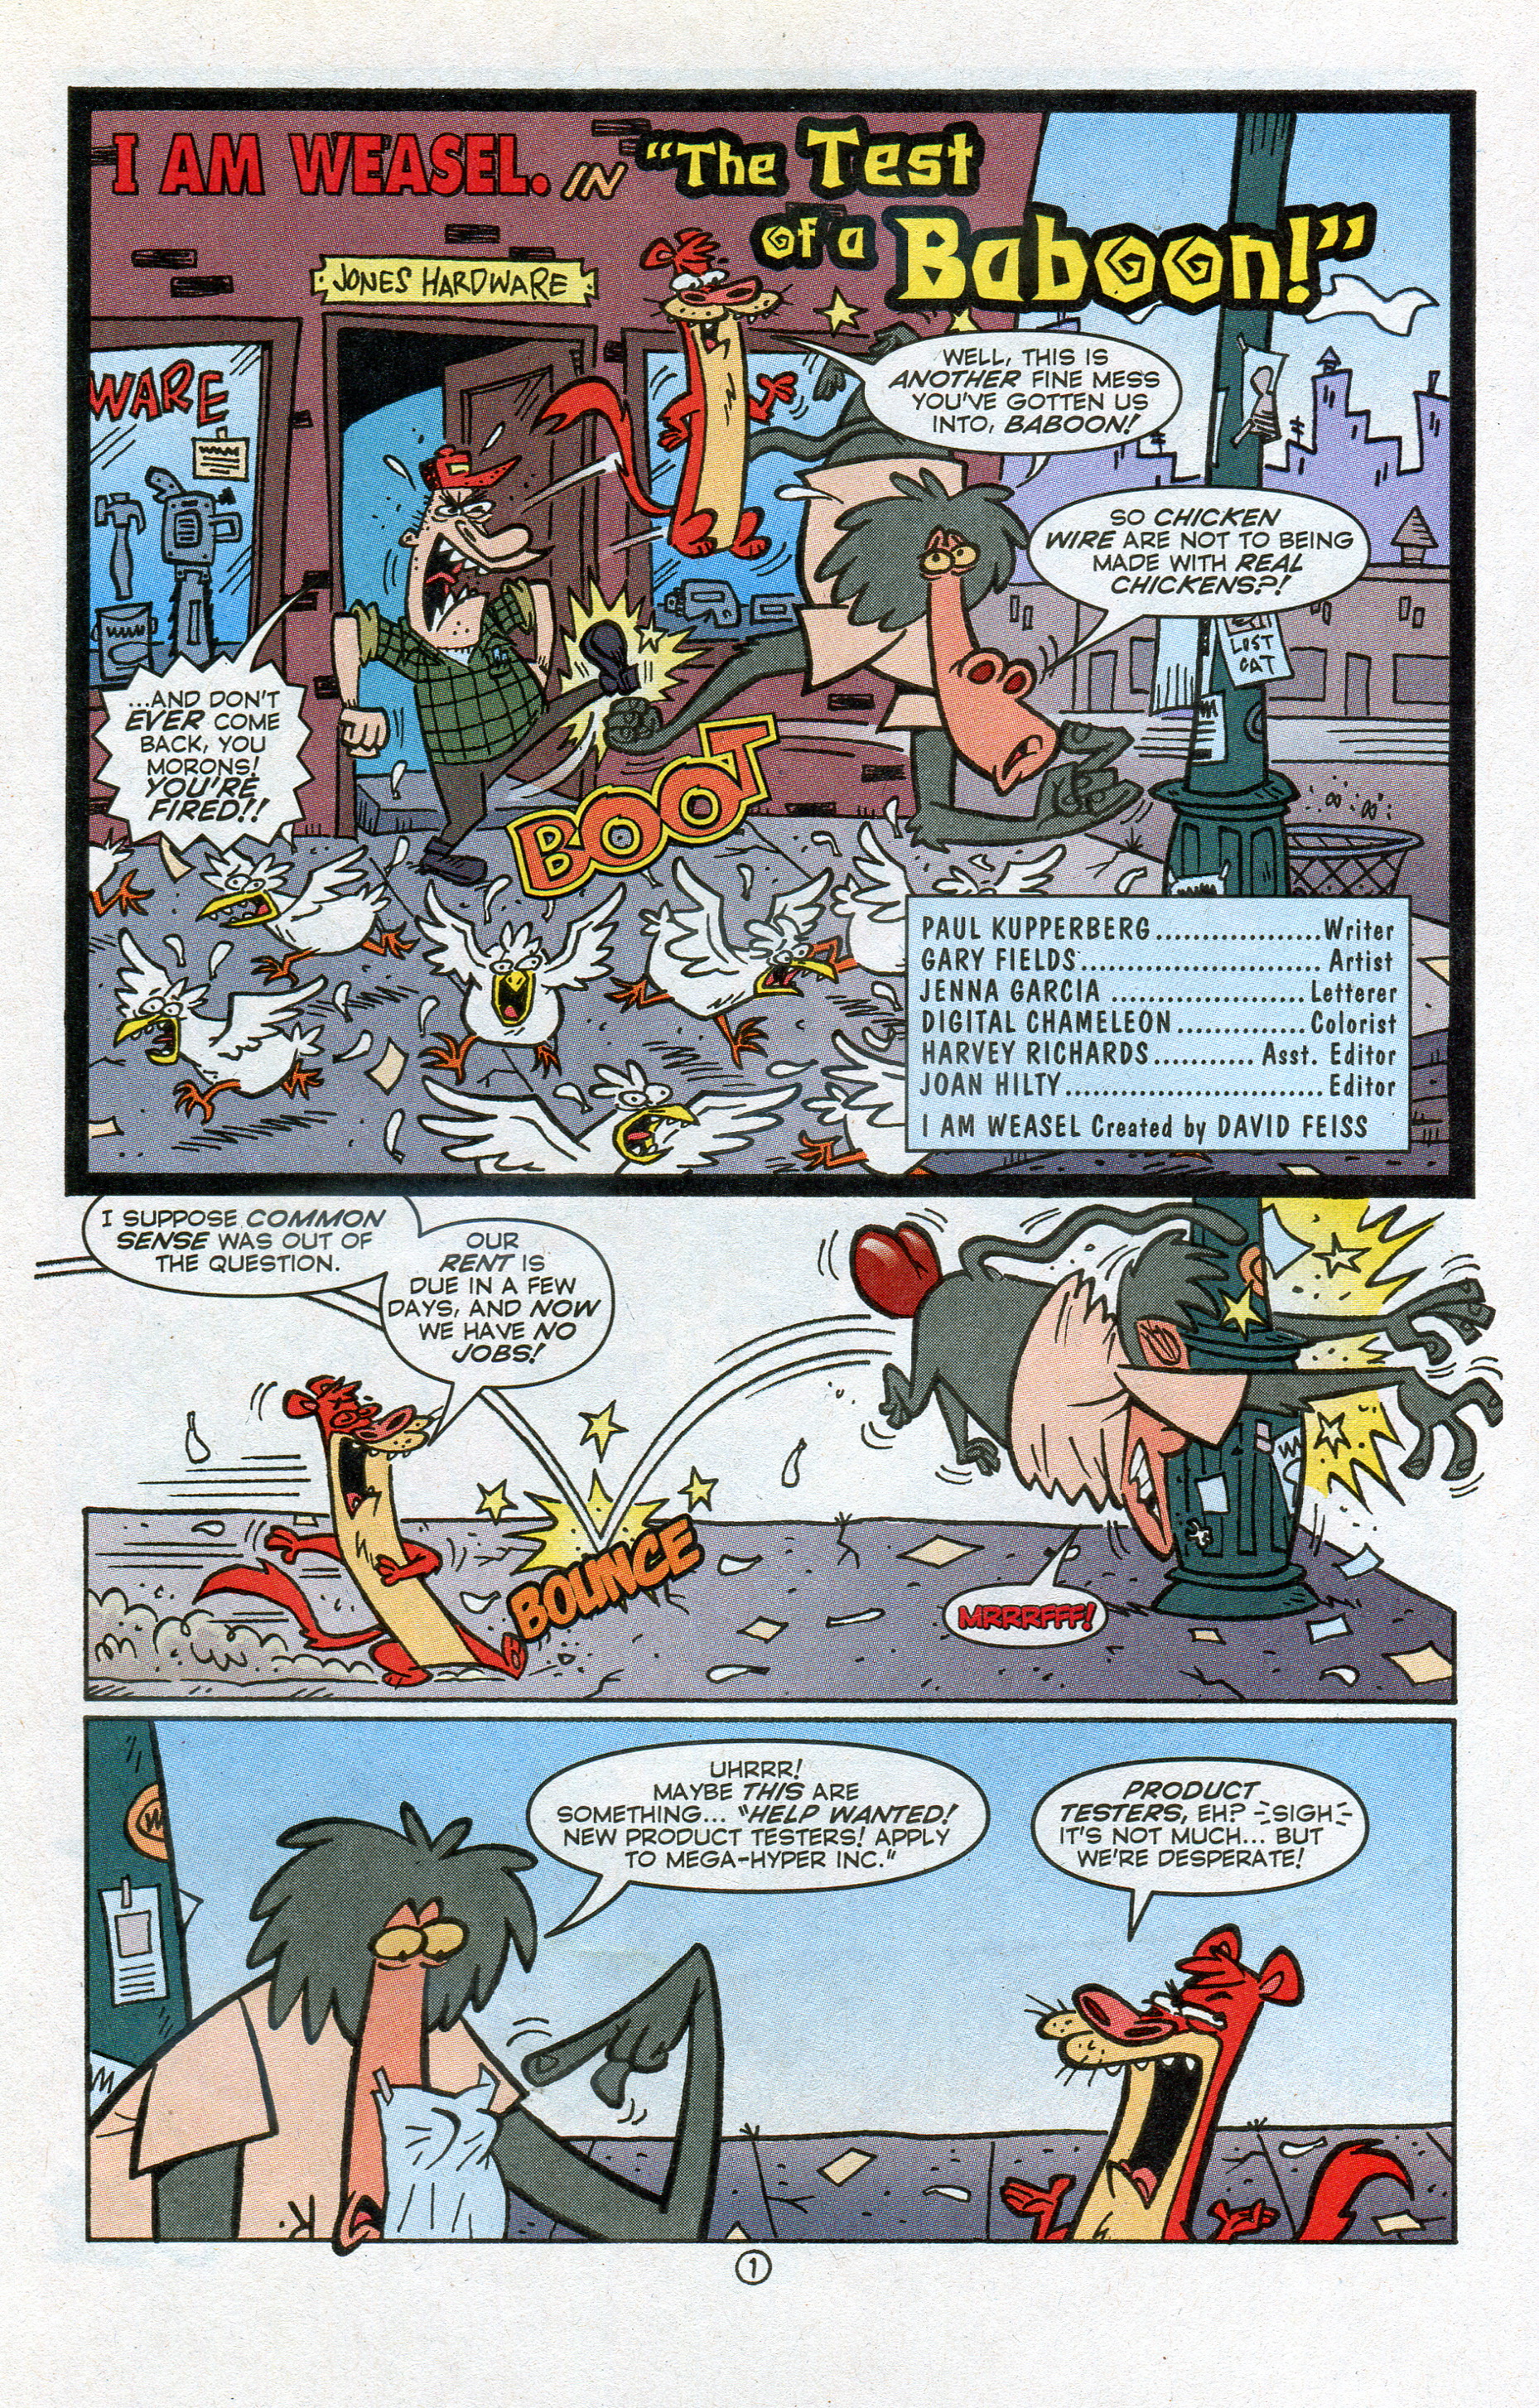 Cartoon Cartoons Issue 4 | Read Cartoon Cartoons Issue 4 comic online in  high quality. Read Full Comic online for free - Read comics online in high  quality .